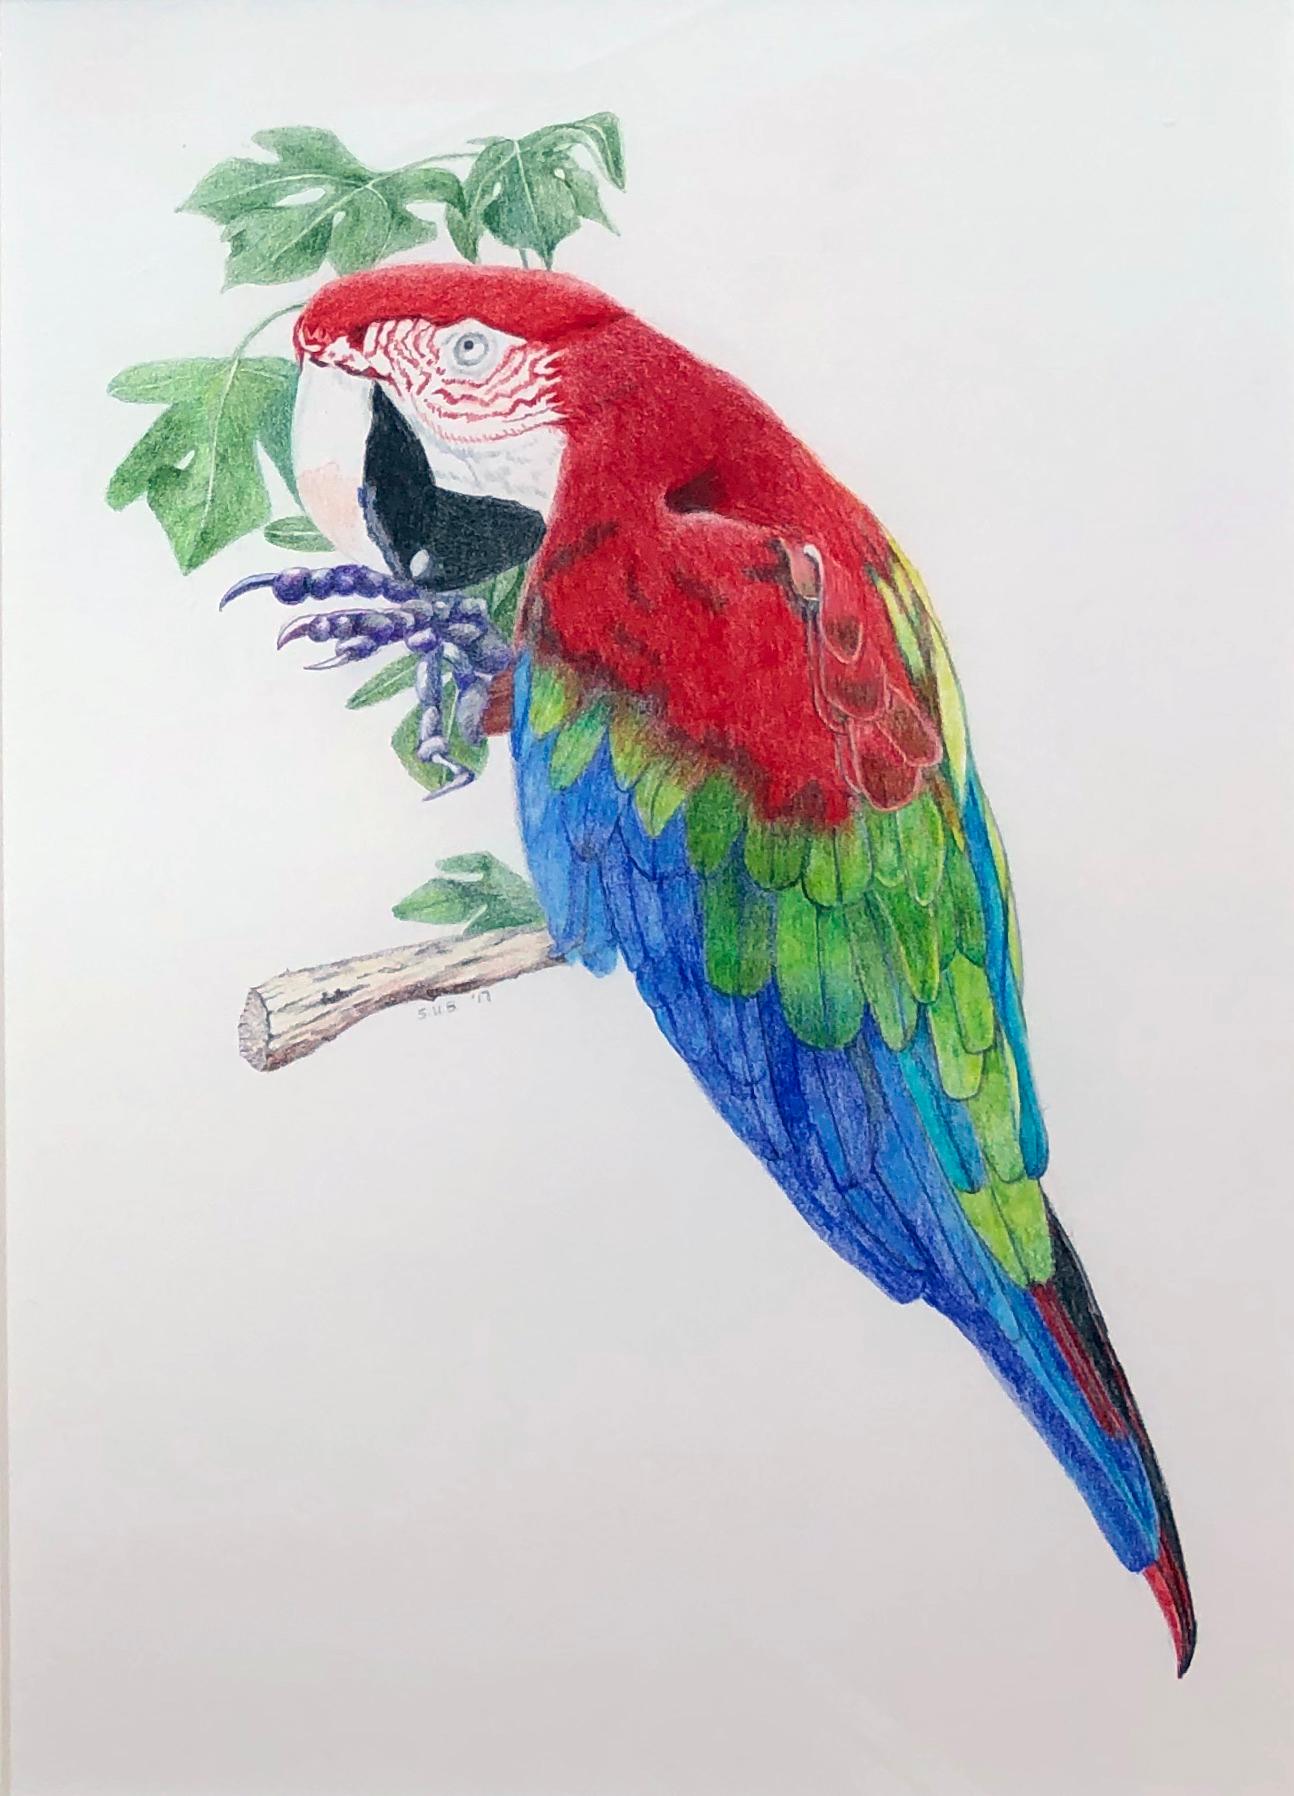 Sylvia Beckman Animal Art - Parrot, Brightly Colored Tropical Bird, Color Pencil on Paper, Framed